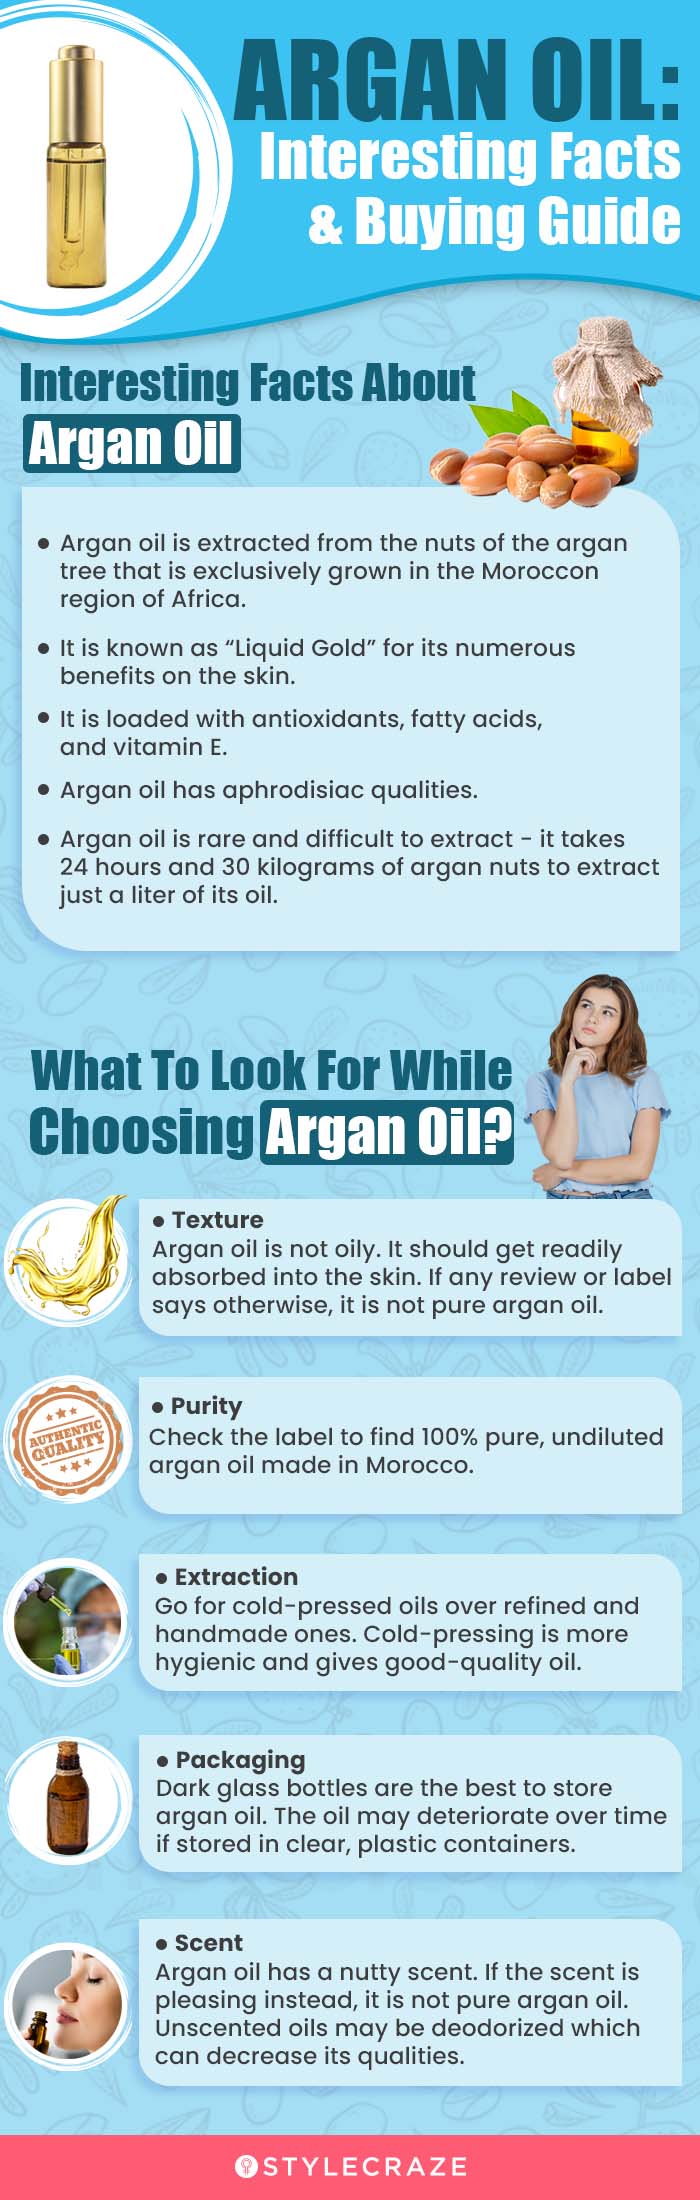 Argan Oil: Interesting Facts And Buying Guide